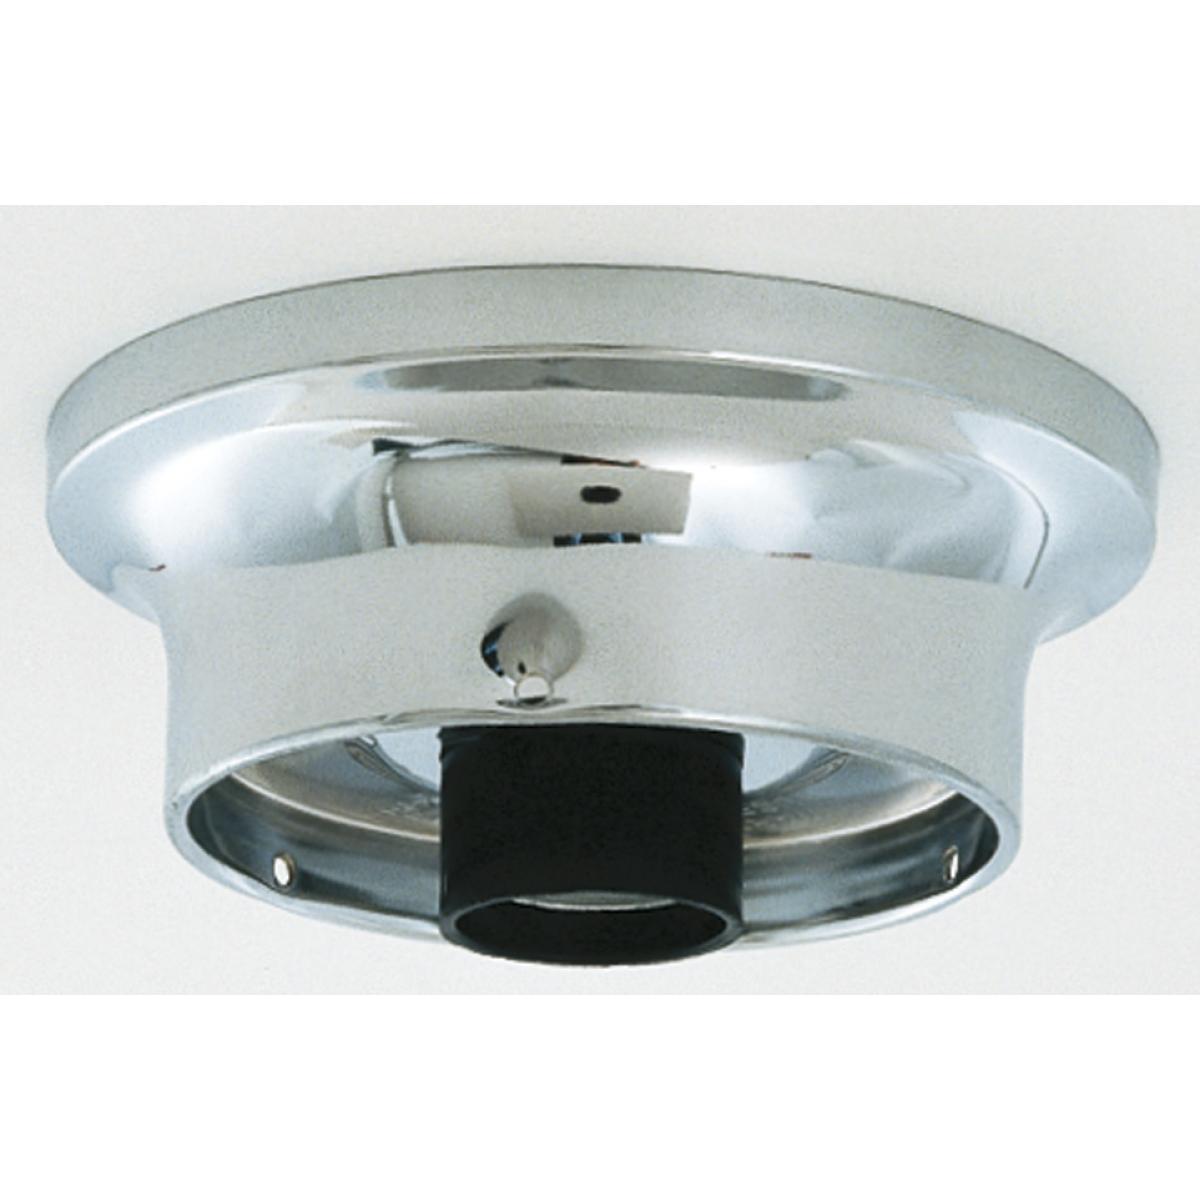 Satco S70-840 Wired Holder Chrome Finish 3-1/4"